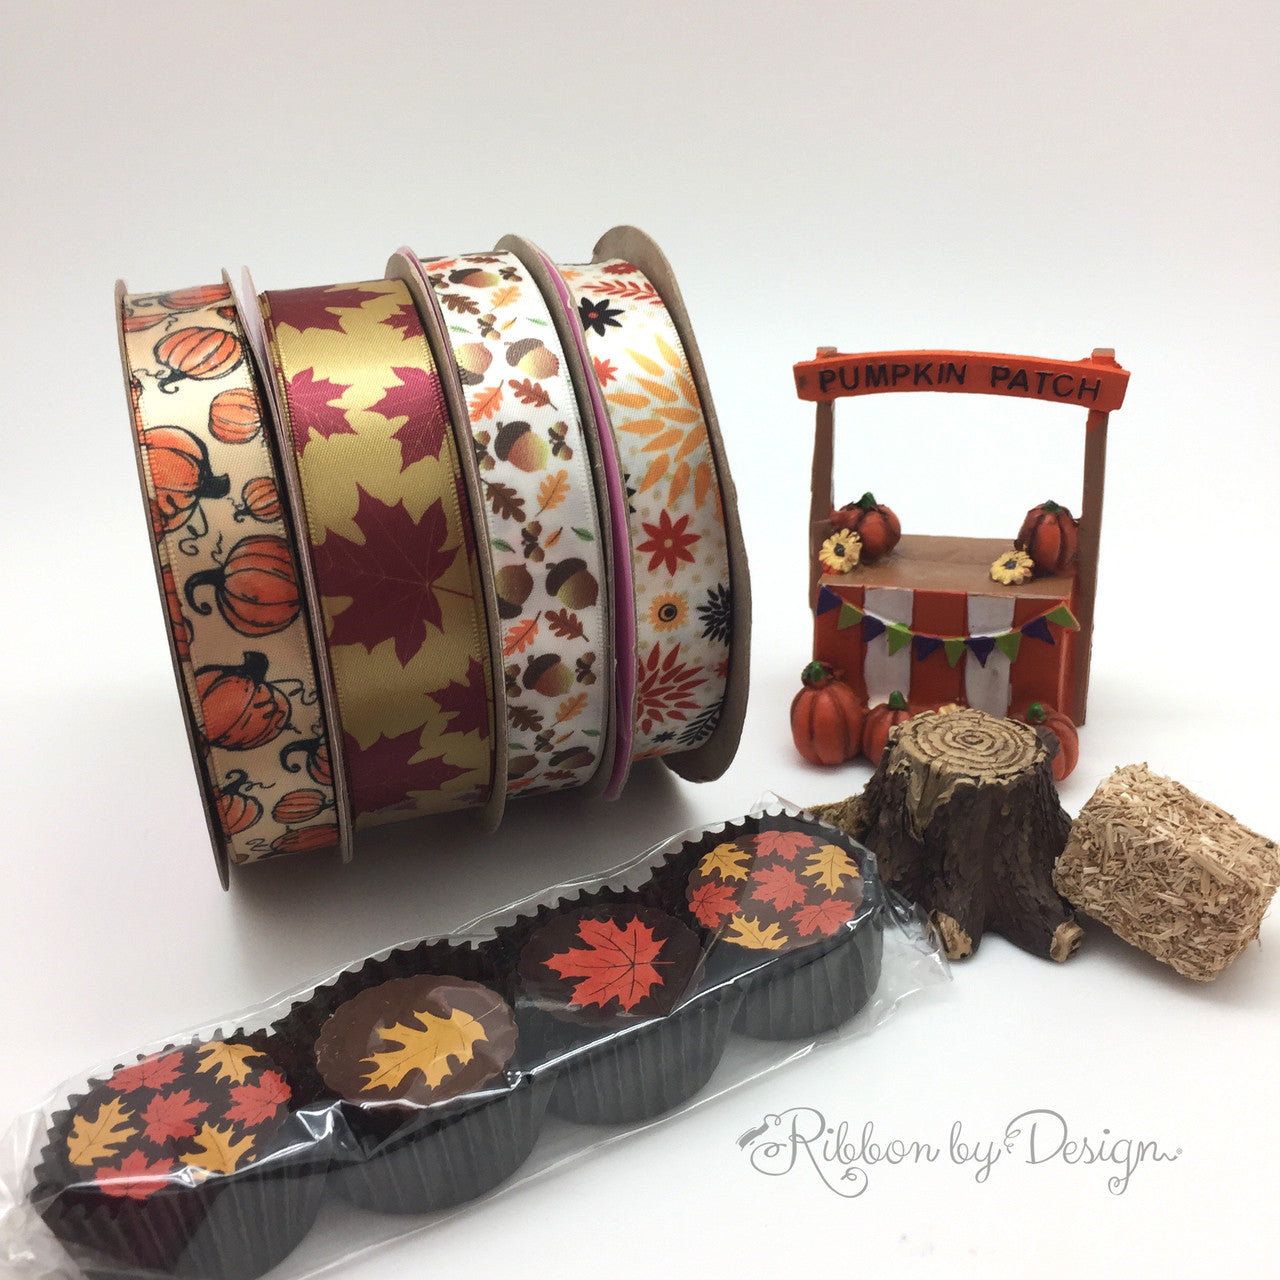 Mix and match our Fall designs to create beautiful Fall decor in your home or for events!